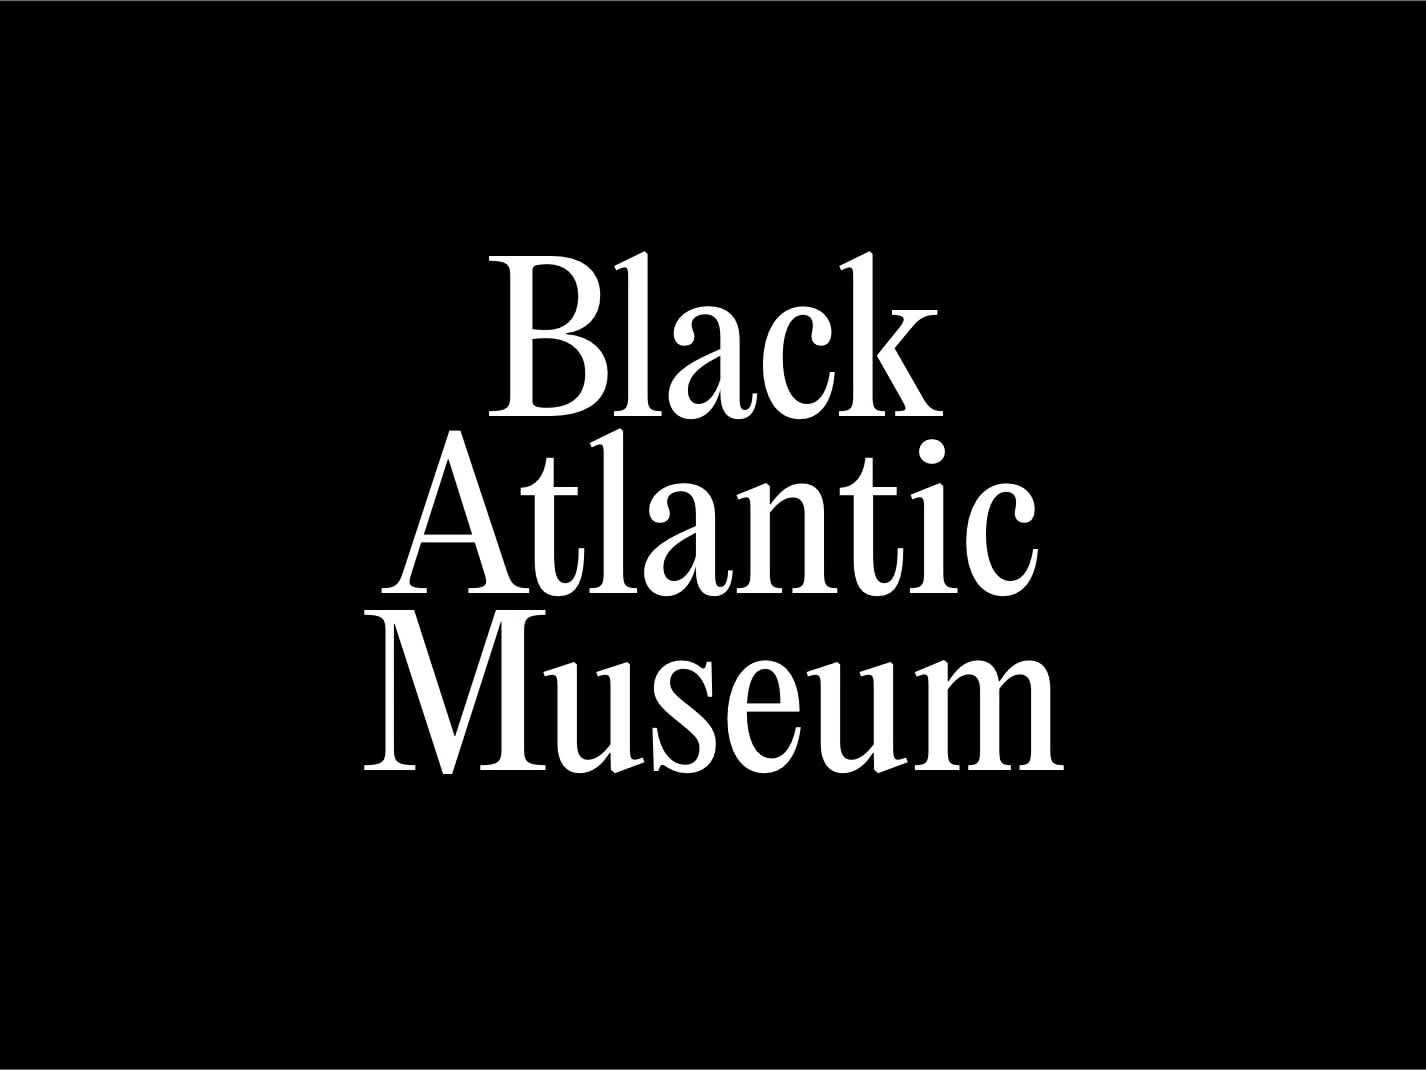 Black background with white serif text which reads, "Black Atlantic Museum".